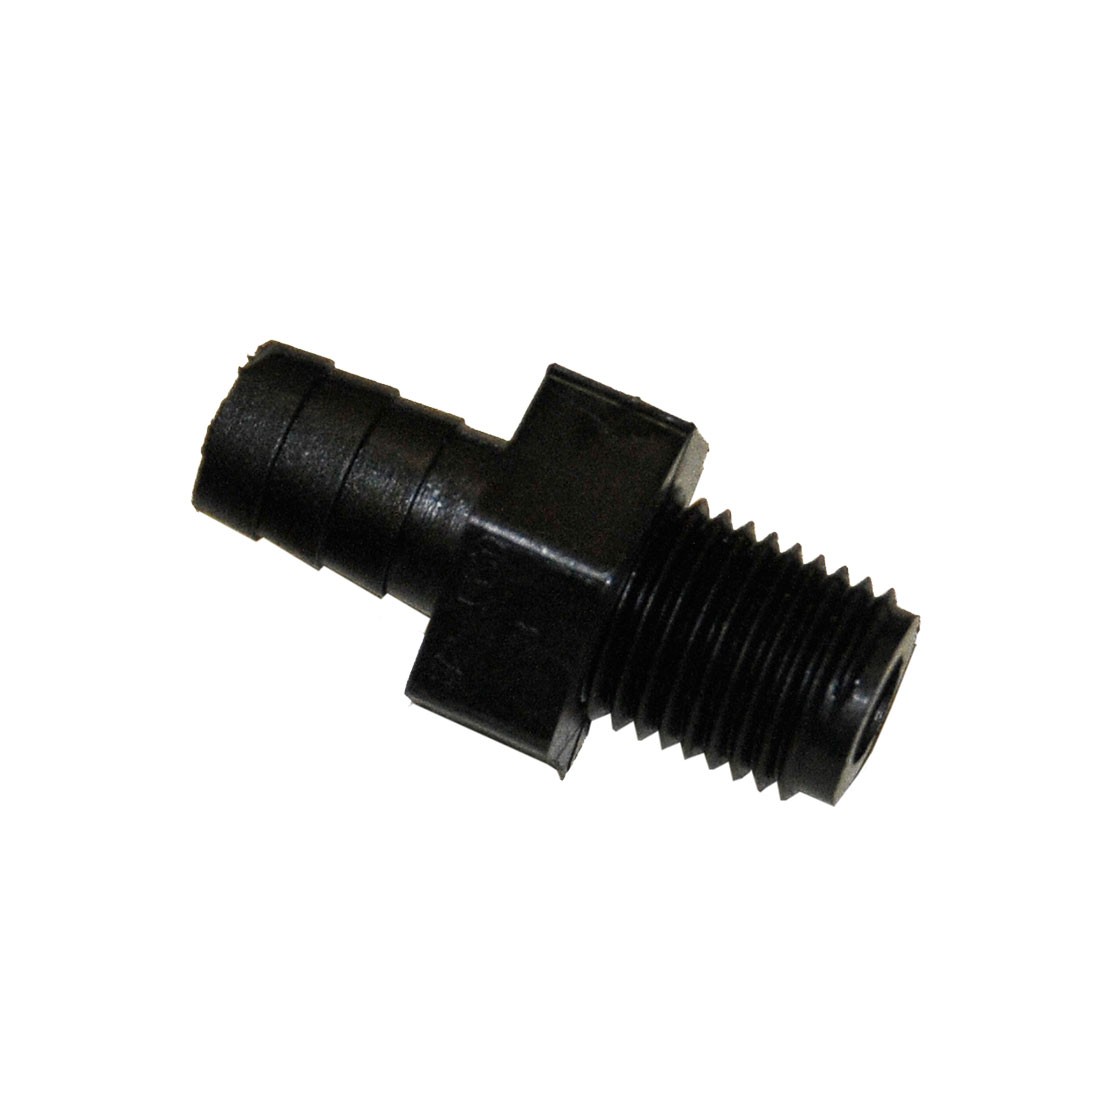 Barb Adapter - 1/4